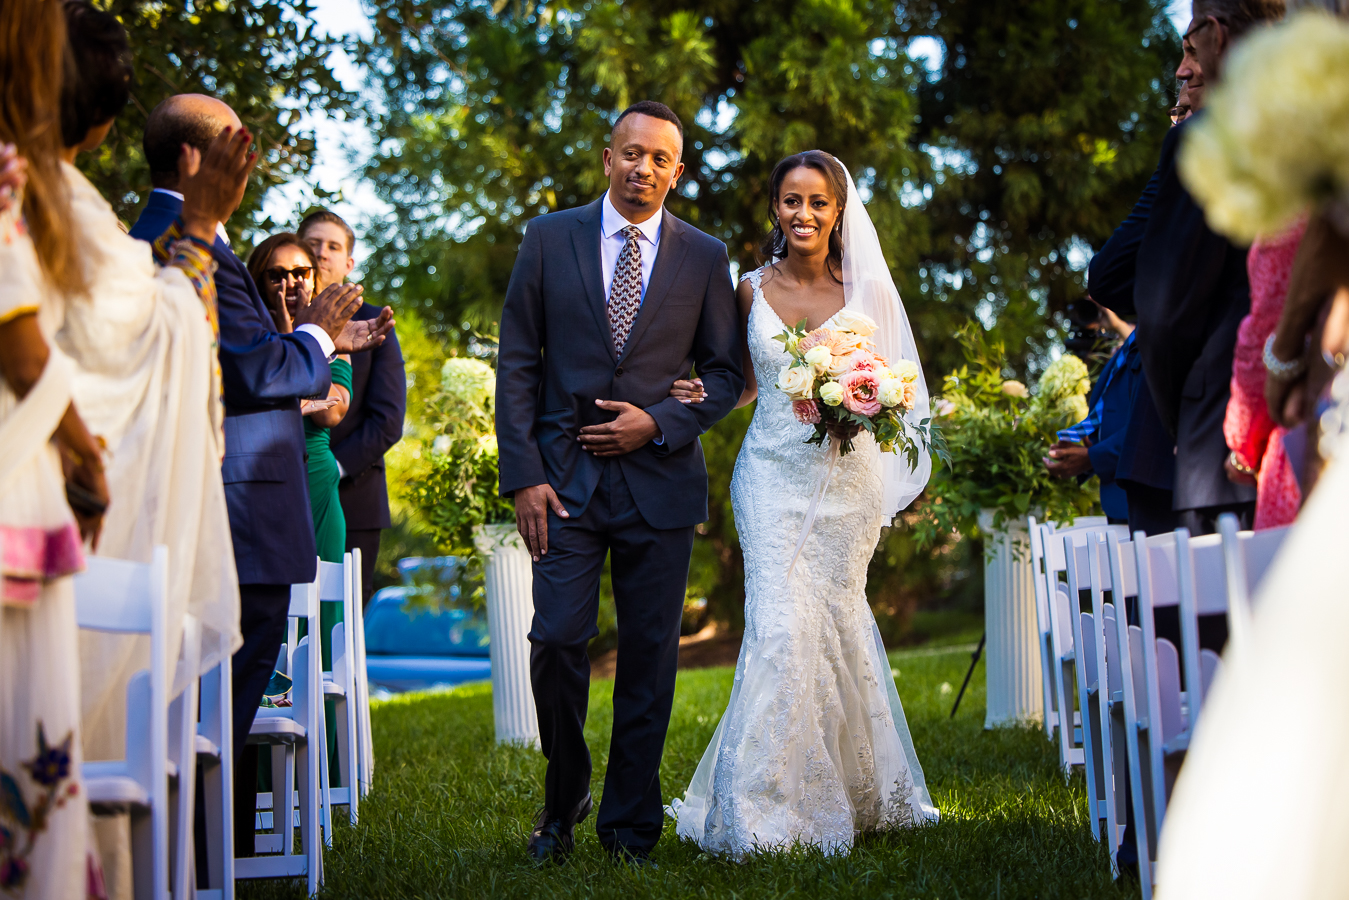 vibrant, colorful image of this Ethiopian bride as she walks down the aisle at her outdoor multicultural st francis hall wedding ceremony captured by wedding photographer, Lisa Rhinehart 